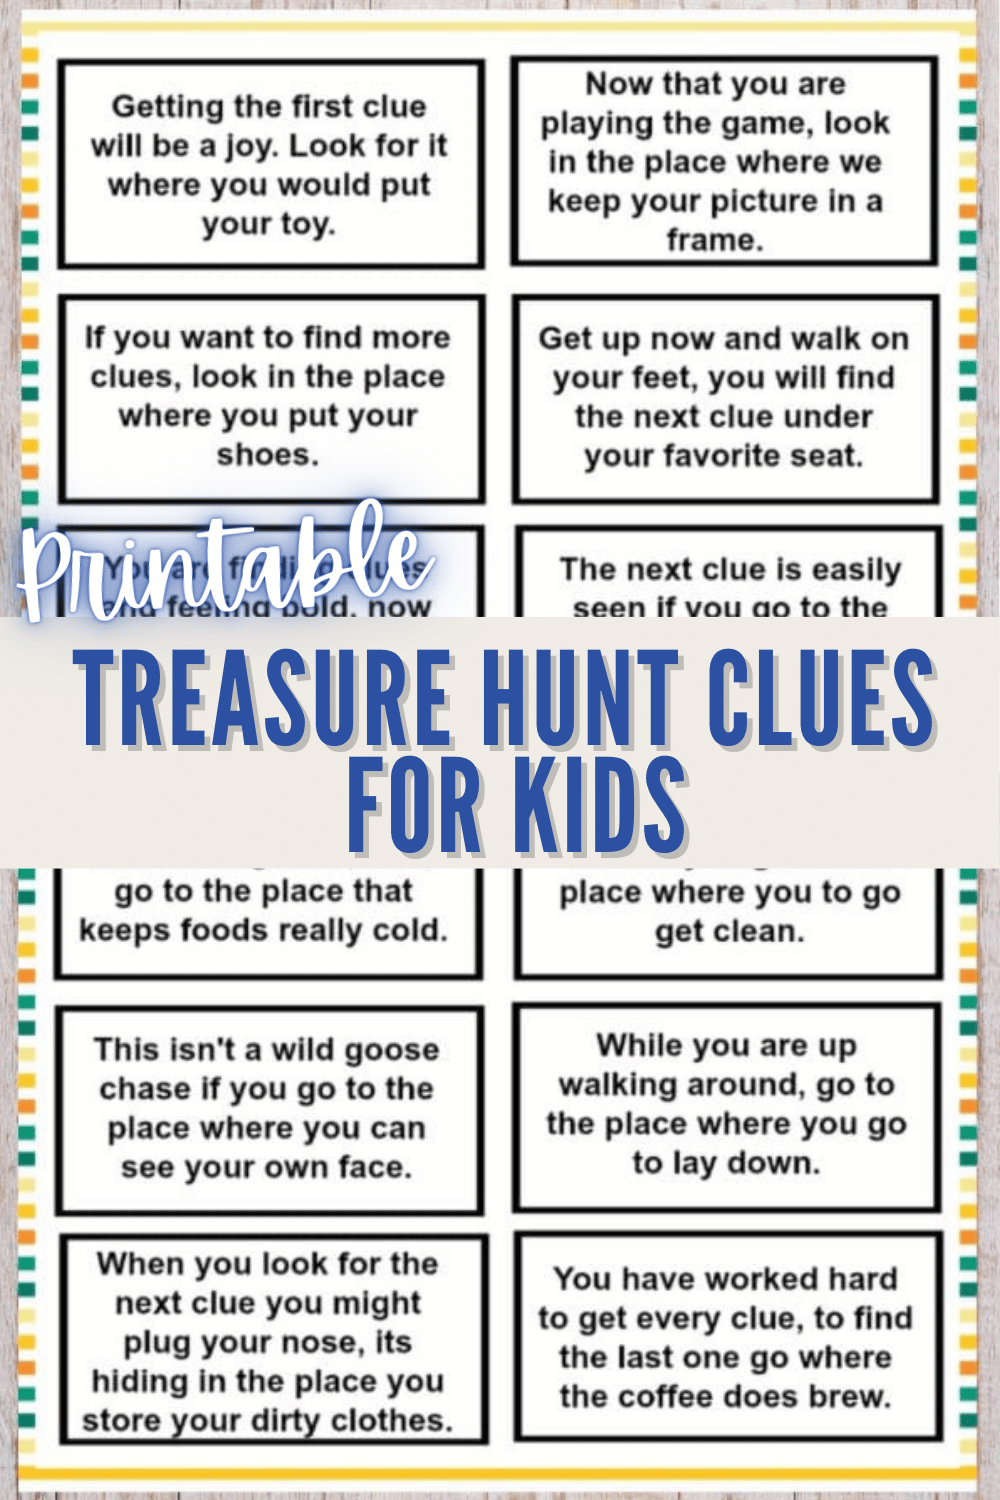 These printable treasure hunt clues for kids are a fun and easy kids activity. The clues are great for any family to use for a fun family activity. #printables #treasurehunt #kidsactivities via @wondermomwannab